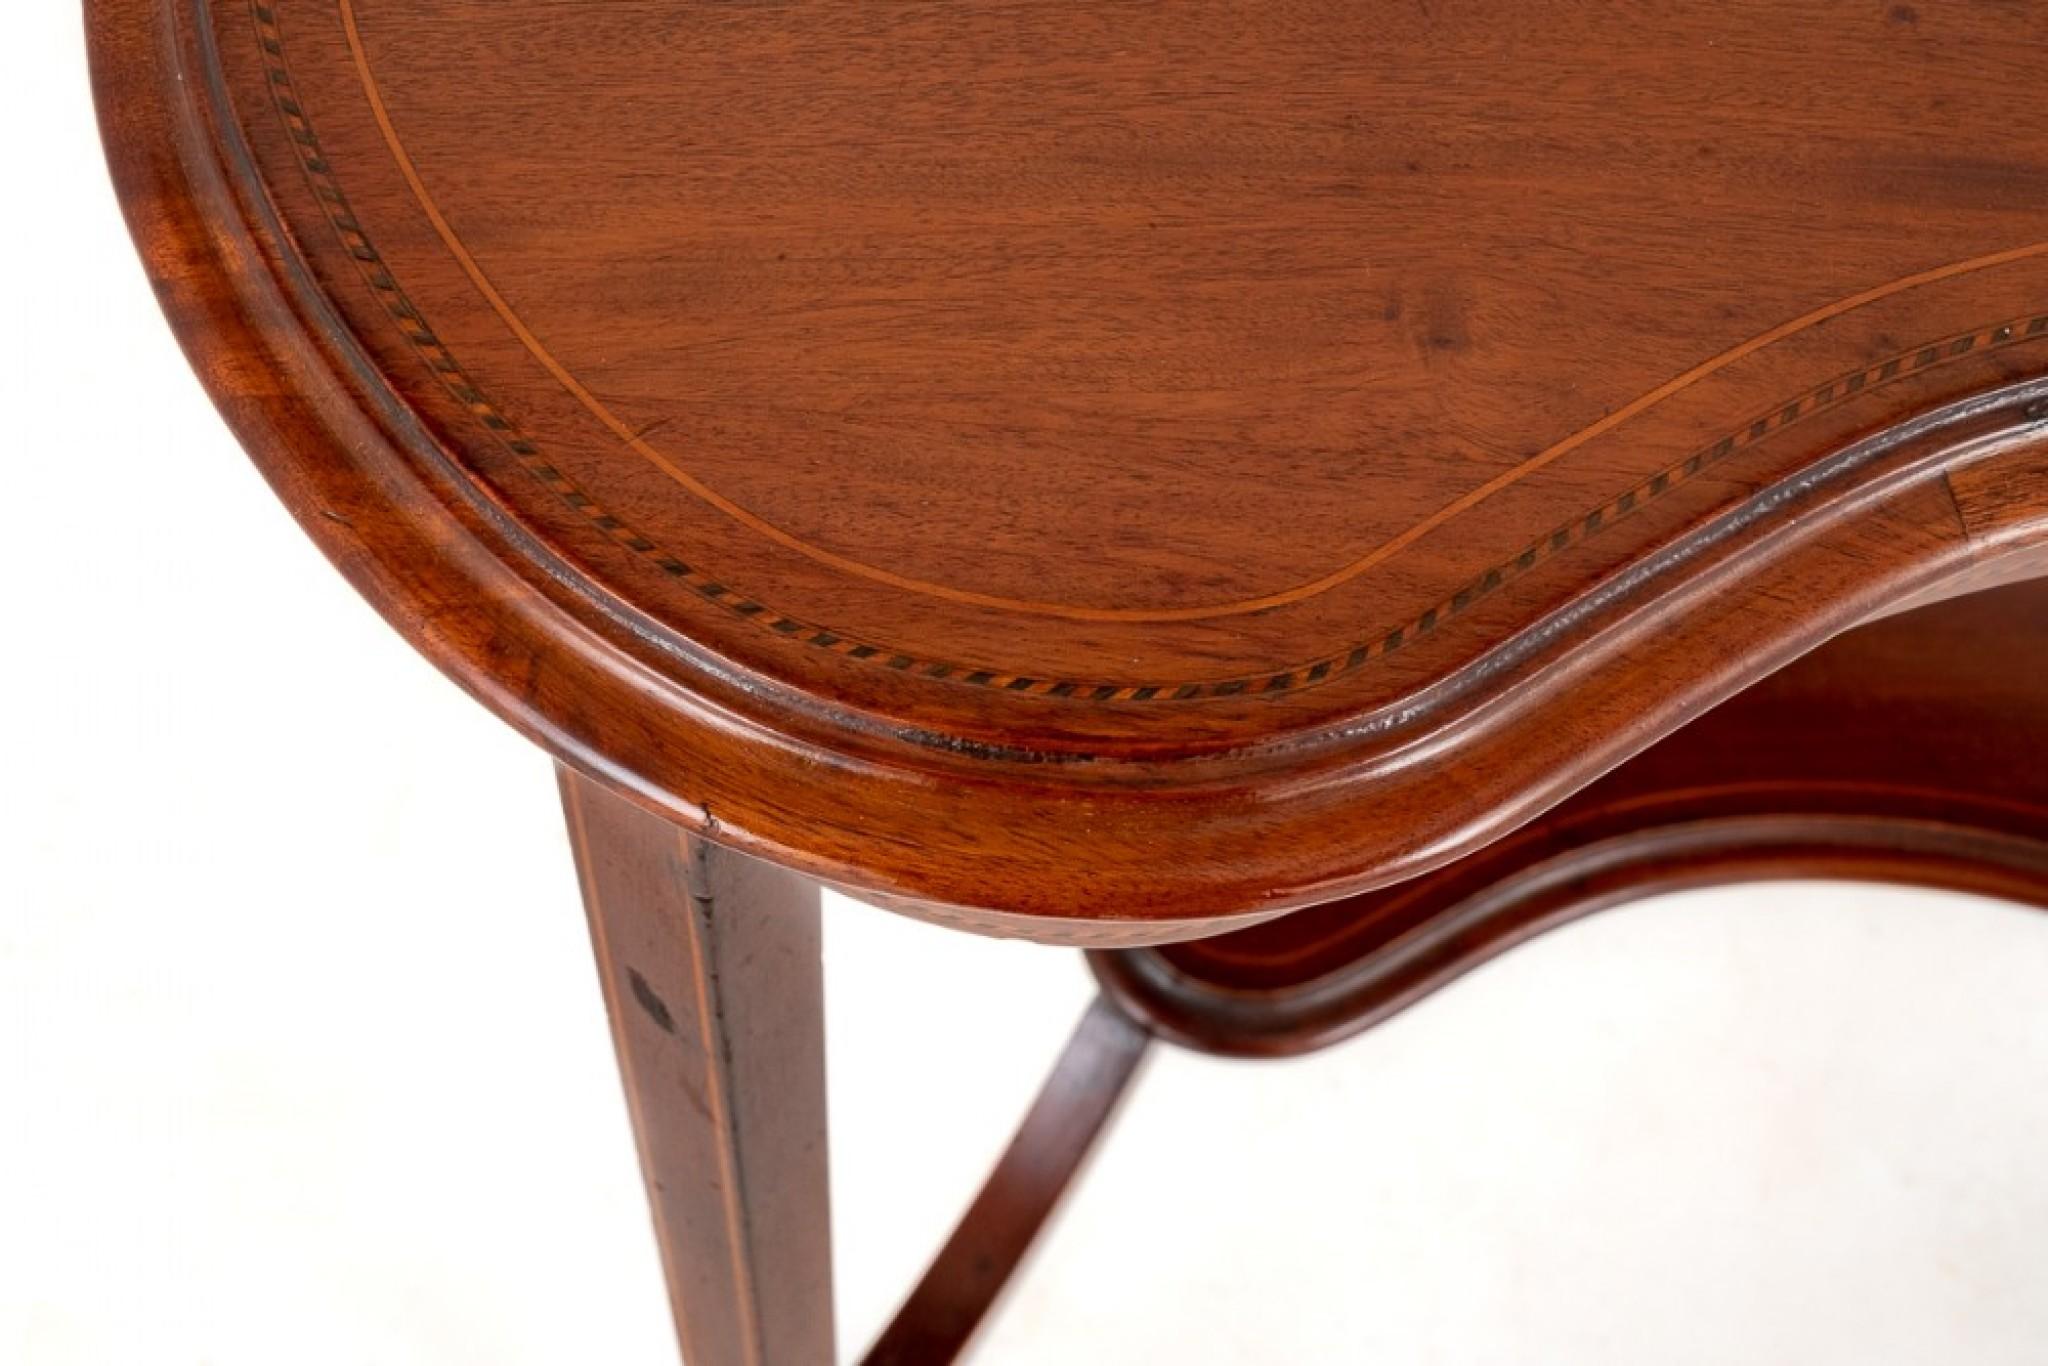 Sheraton revival mahogany kidney shaped occasional table.
This Occasional Table Stands upon Shaped Legs.
circa 1900
The Undershelf Featuring Shaped Supports.
The Whole of the Table Having Boxwood Line Inlays.
Presented in good condition.